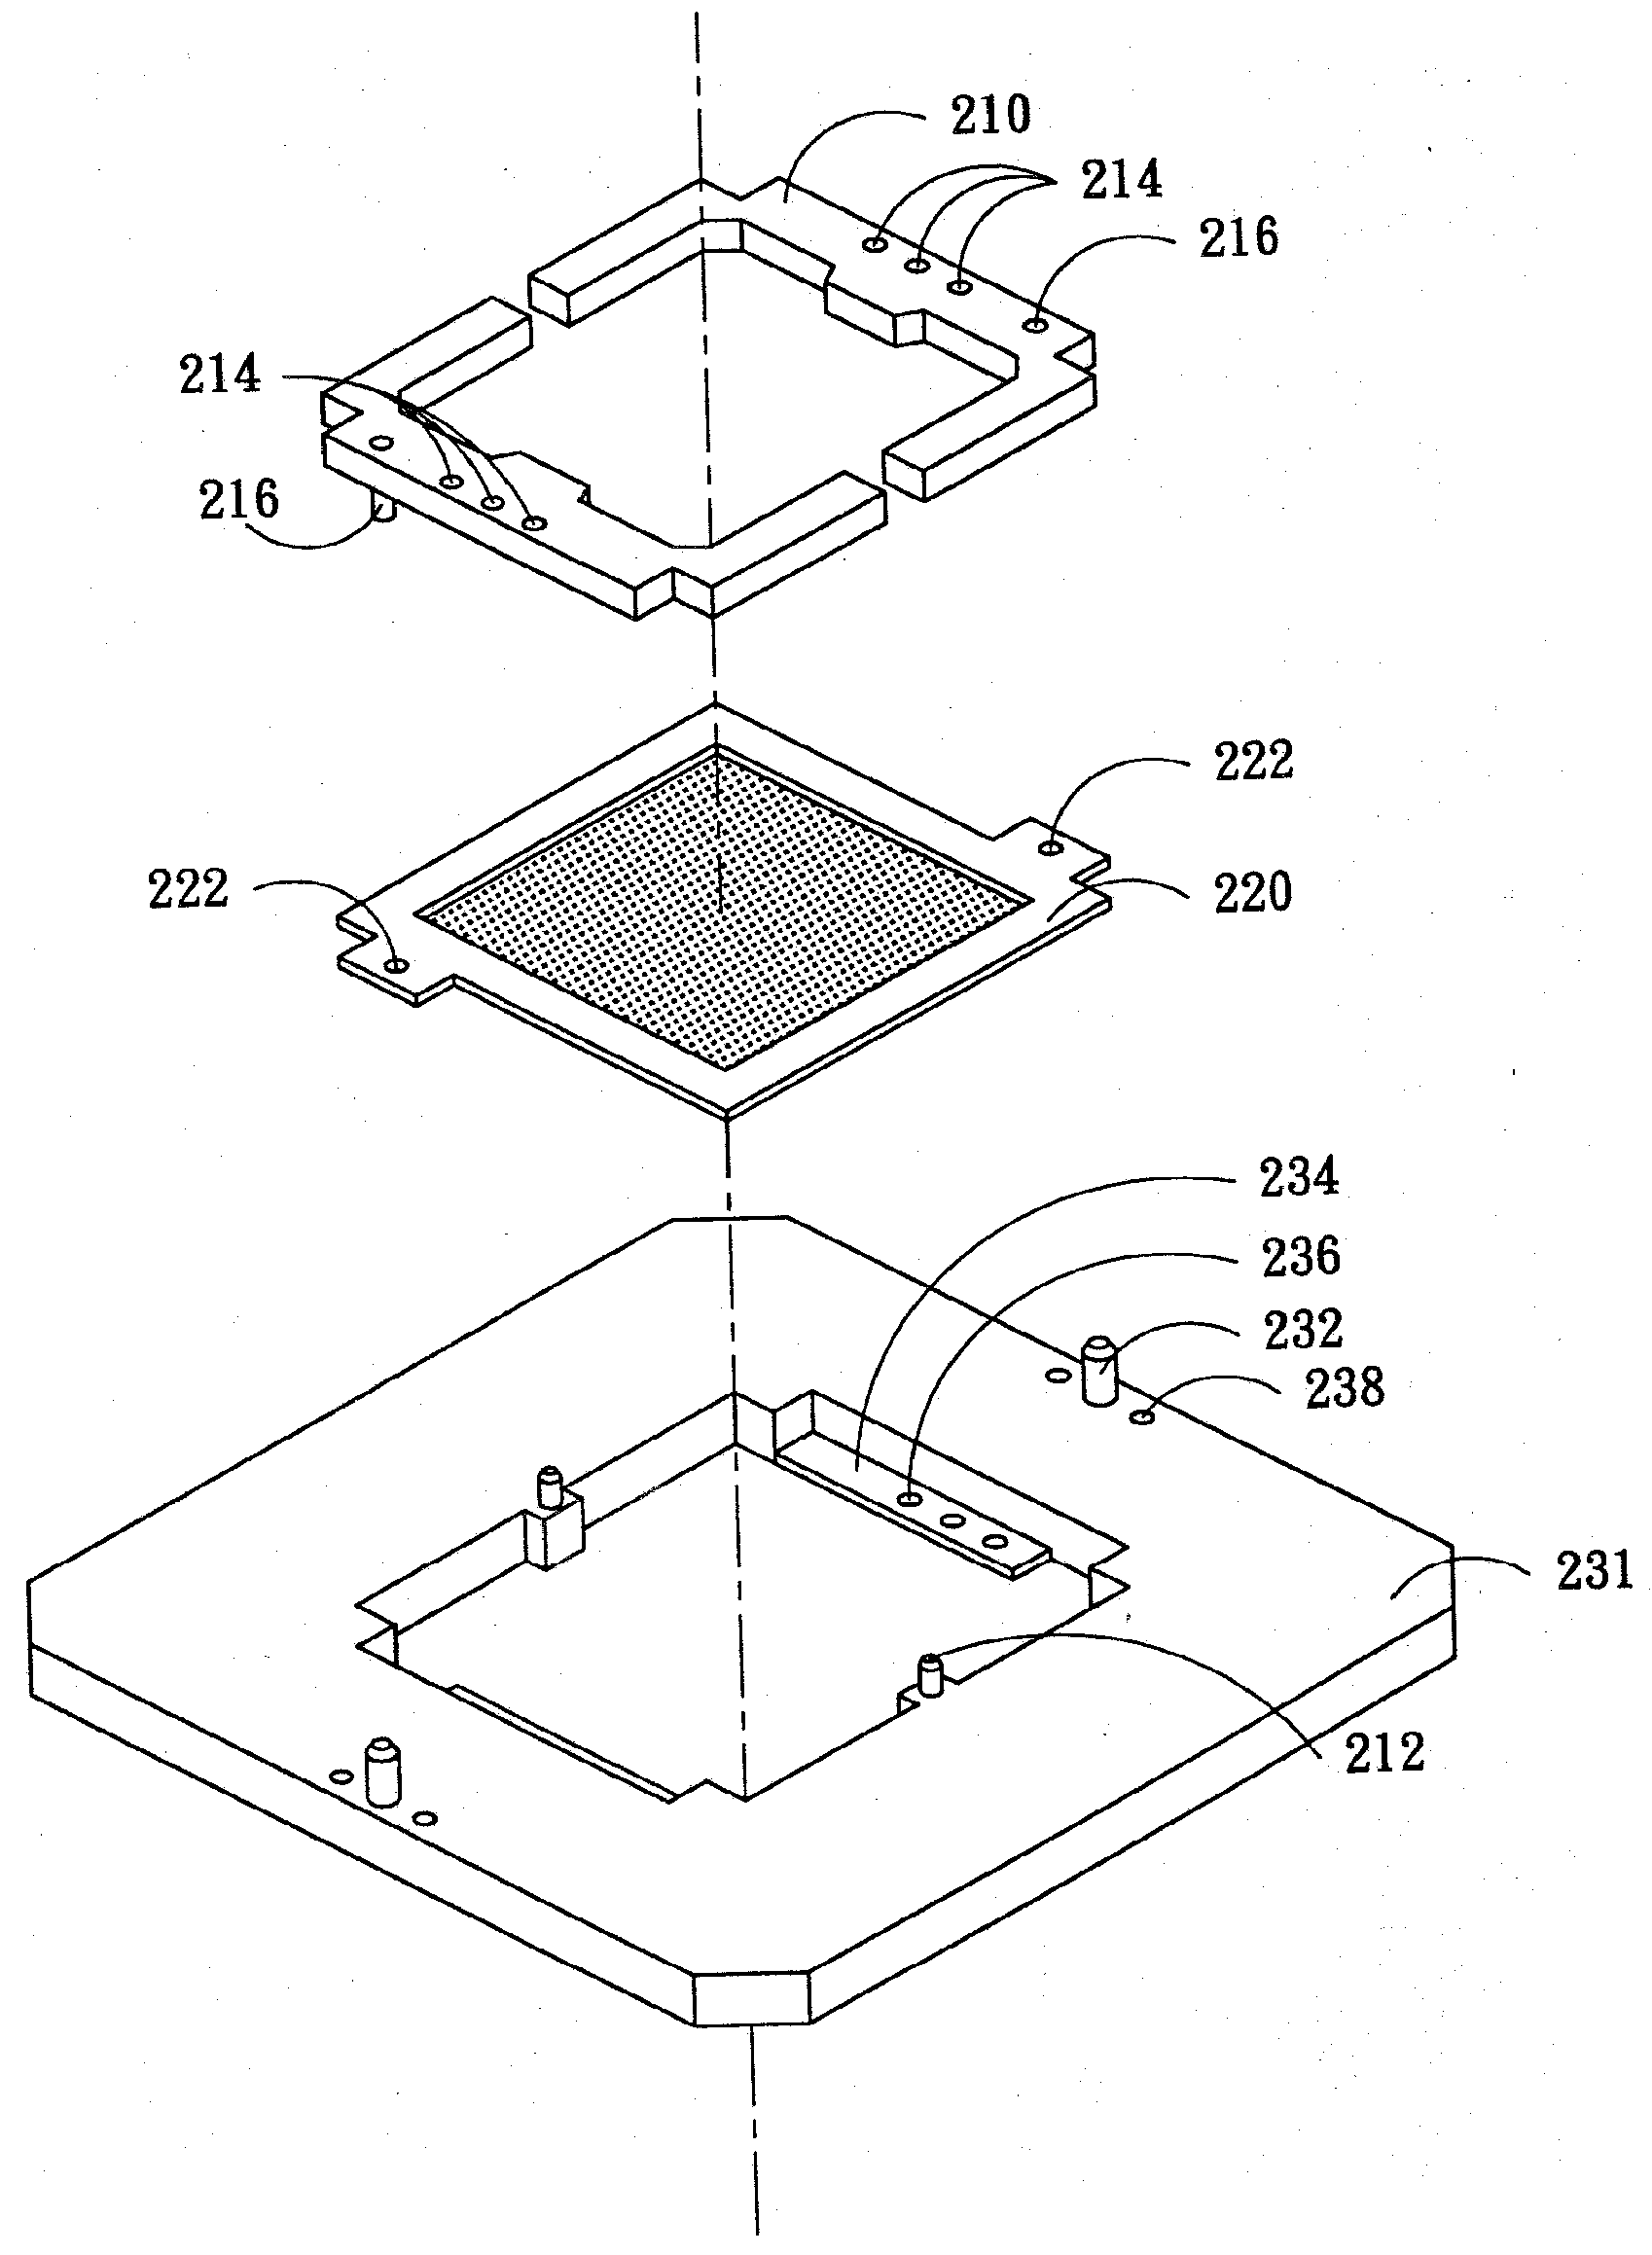 Socket base adaptable to a load board for testing IC